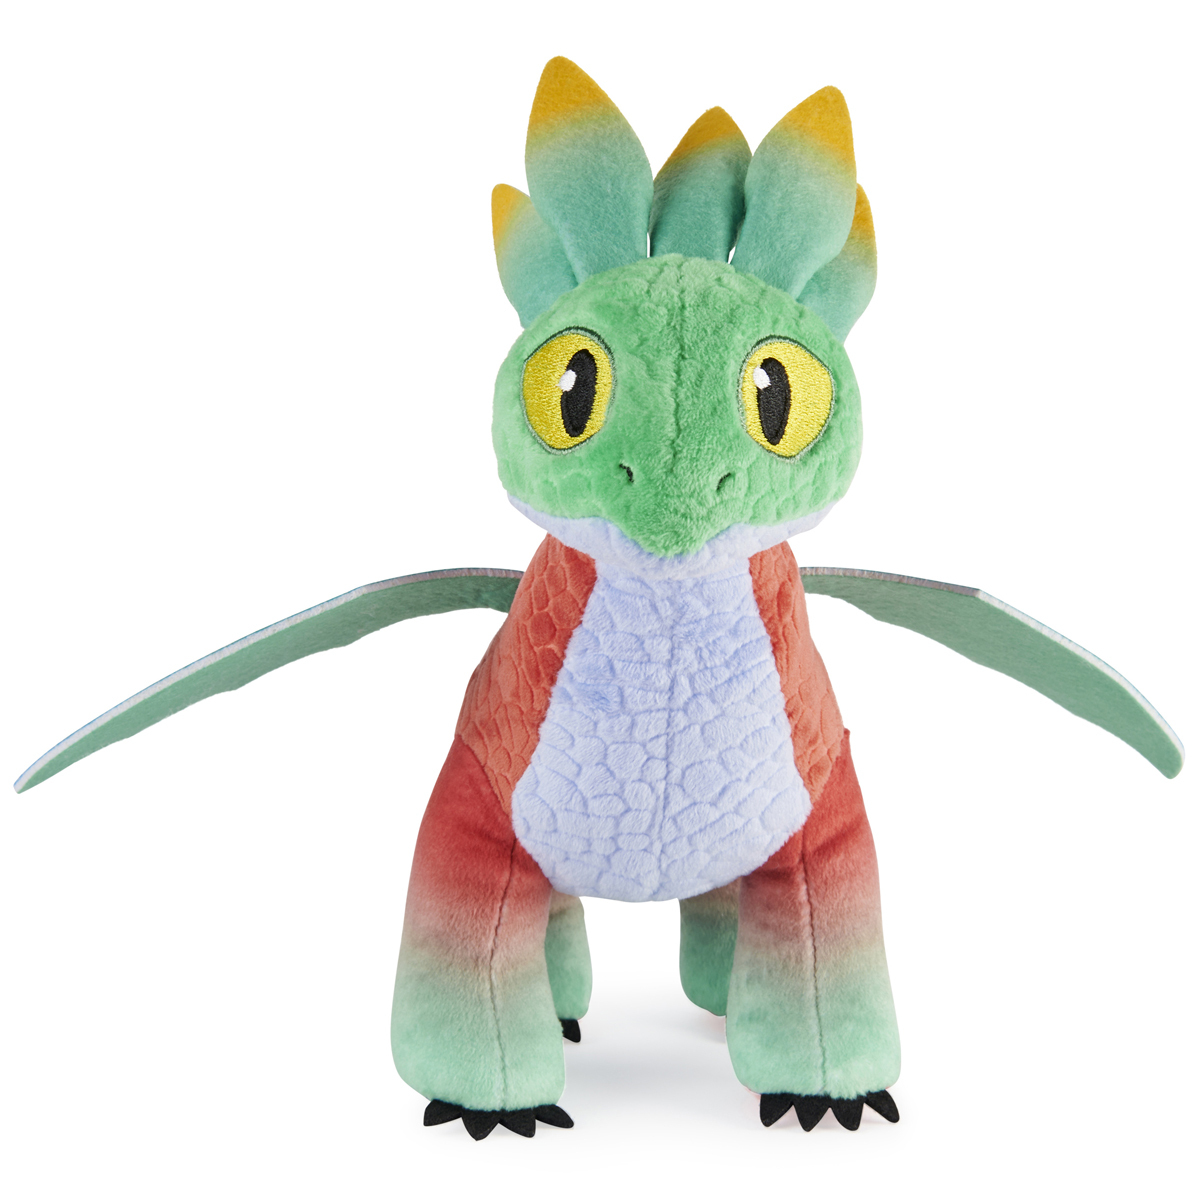 Dreamworks Dragons The Nine Realms, Crystal Plush Dragons, 3-inch, Kids  Toys for Age 4 and Up (Styles May Vary)